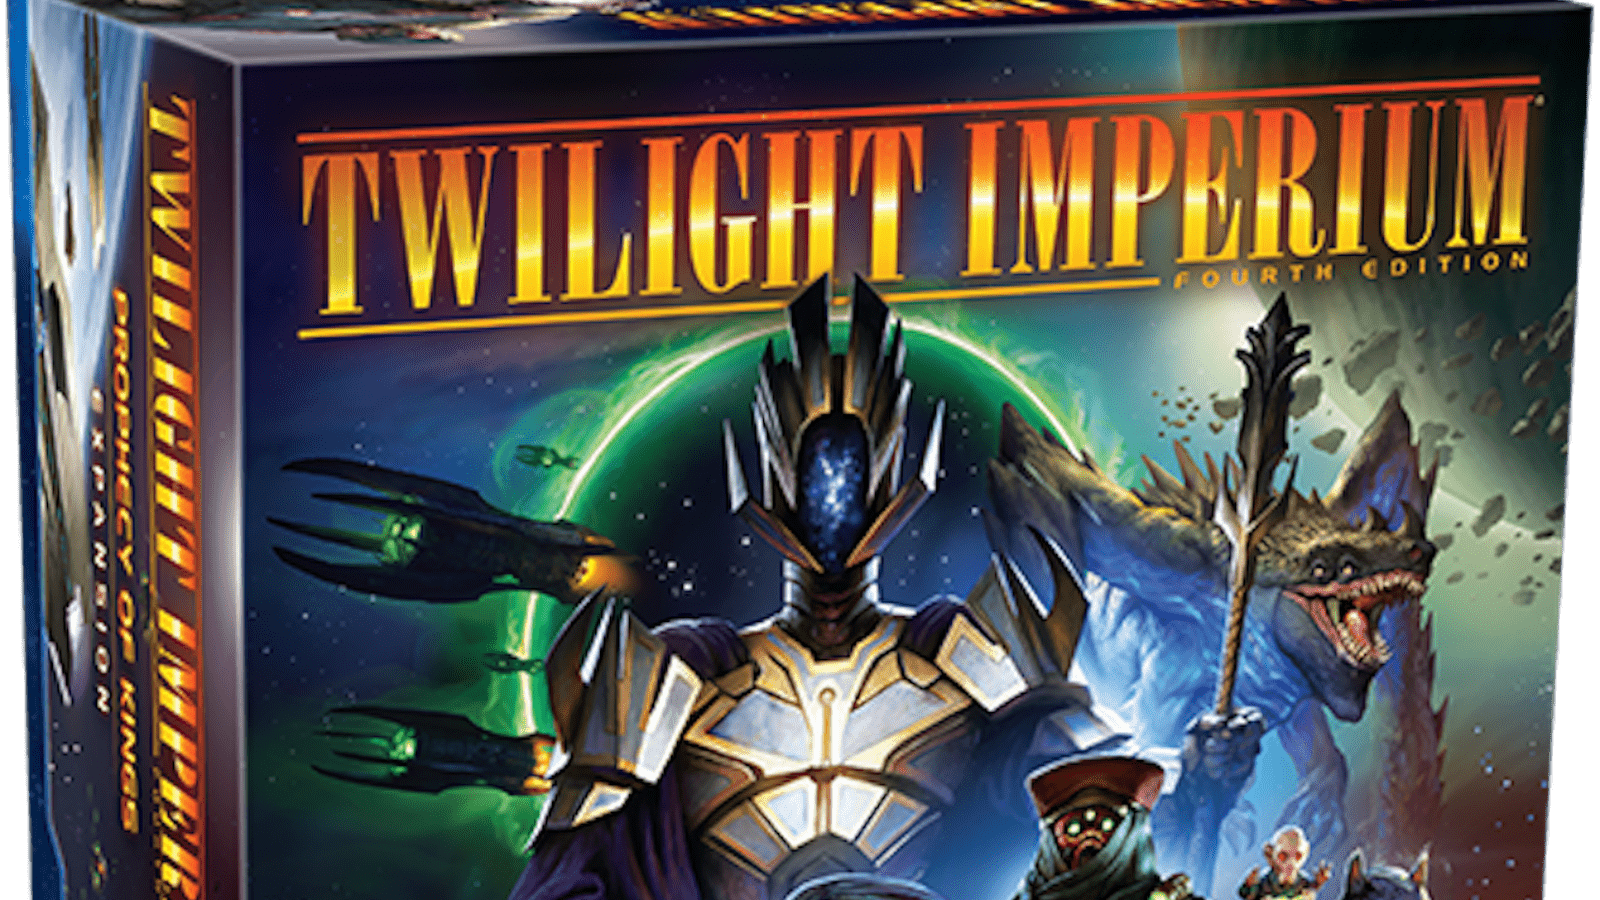 Twilight Imperium: Prophecy of Kings: not enough bang for your buck